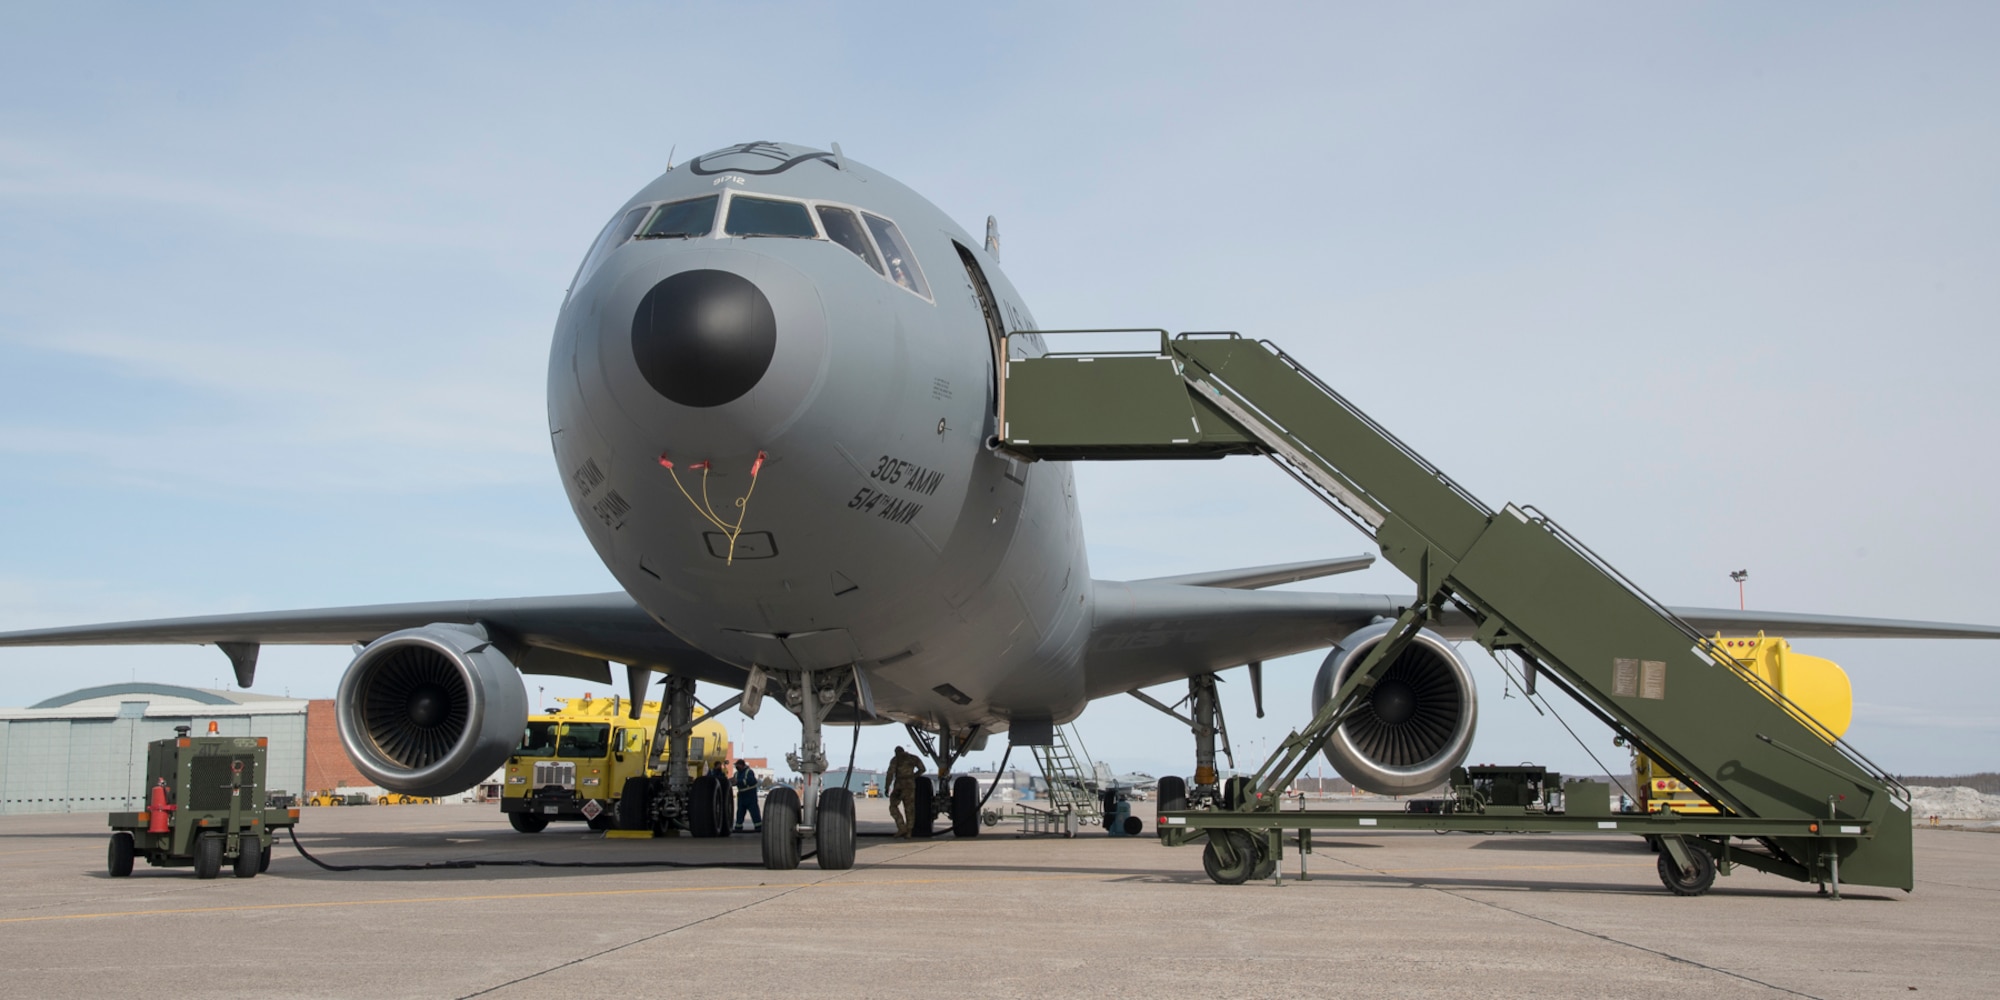 A United States Air Force KC-10 Extender gets refueled before heading to Thule, Greenland for Exercise AMALGAM DART 21-2, outside of Hangar 1, 4 Wing Cold Lake, Alberta, on March 22, 2021.